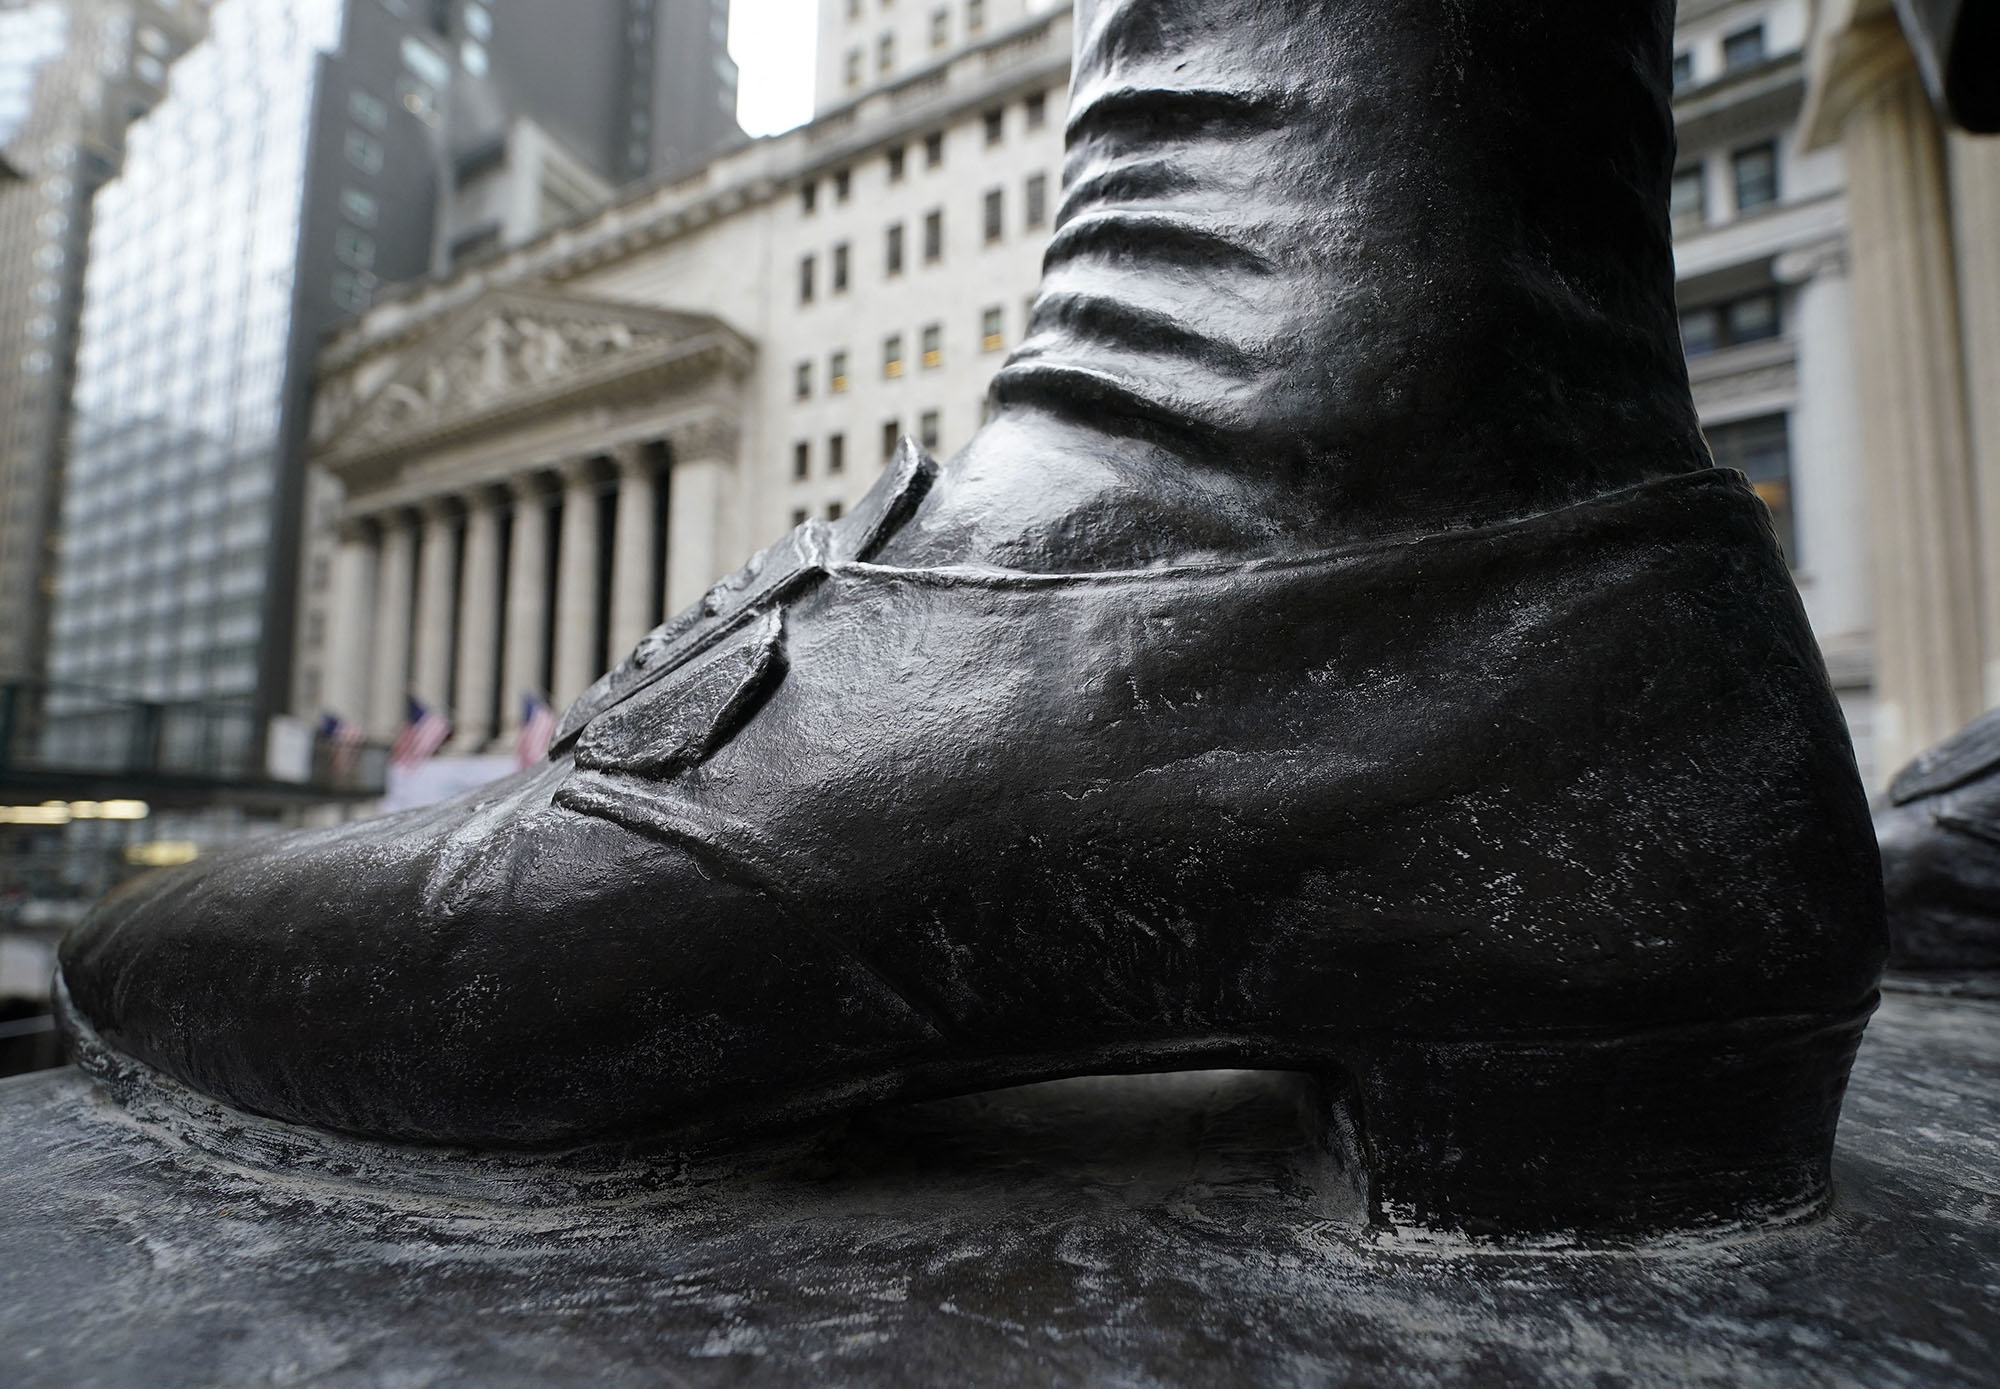 The shoe of the George Washington Statue at the Federal Hall National Memorial on Wall Street across the New York Stock Exchange on January 27, 2021. - Wall Street stocks slid to session lows Wednesday as Federal Reserve Chair Jerome Powell cautioned the US economic outlook was "highly uncertain" in light of the surging Covid-19 outbreak. (Photo by TIMOTHY A. CLARY / AFP)